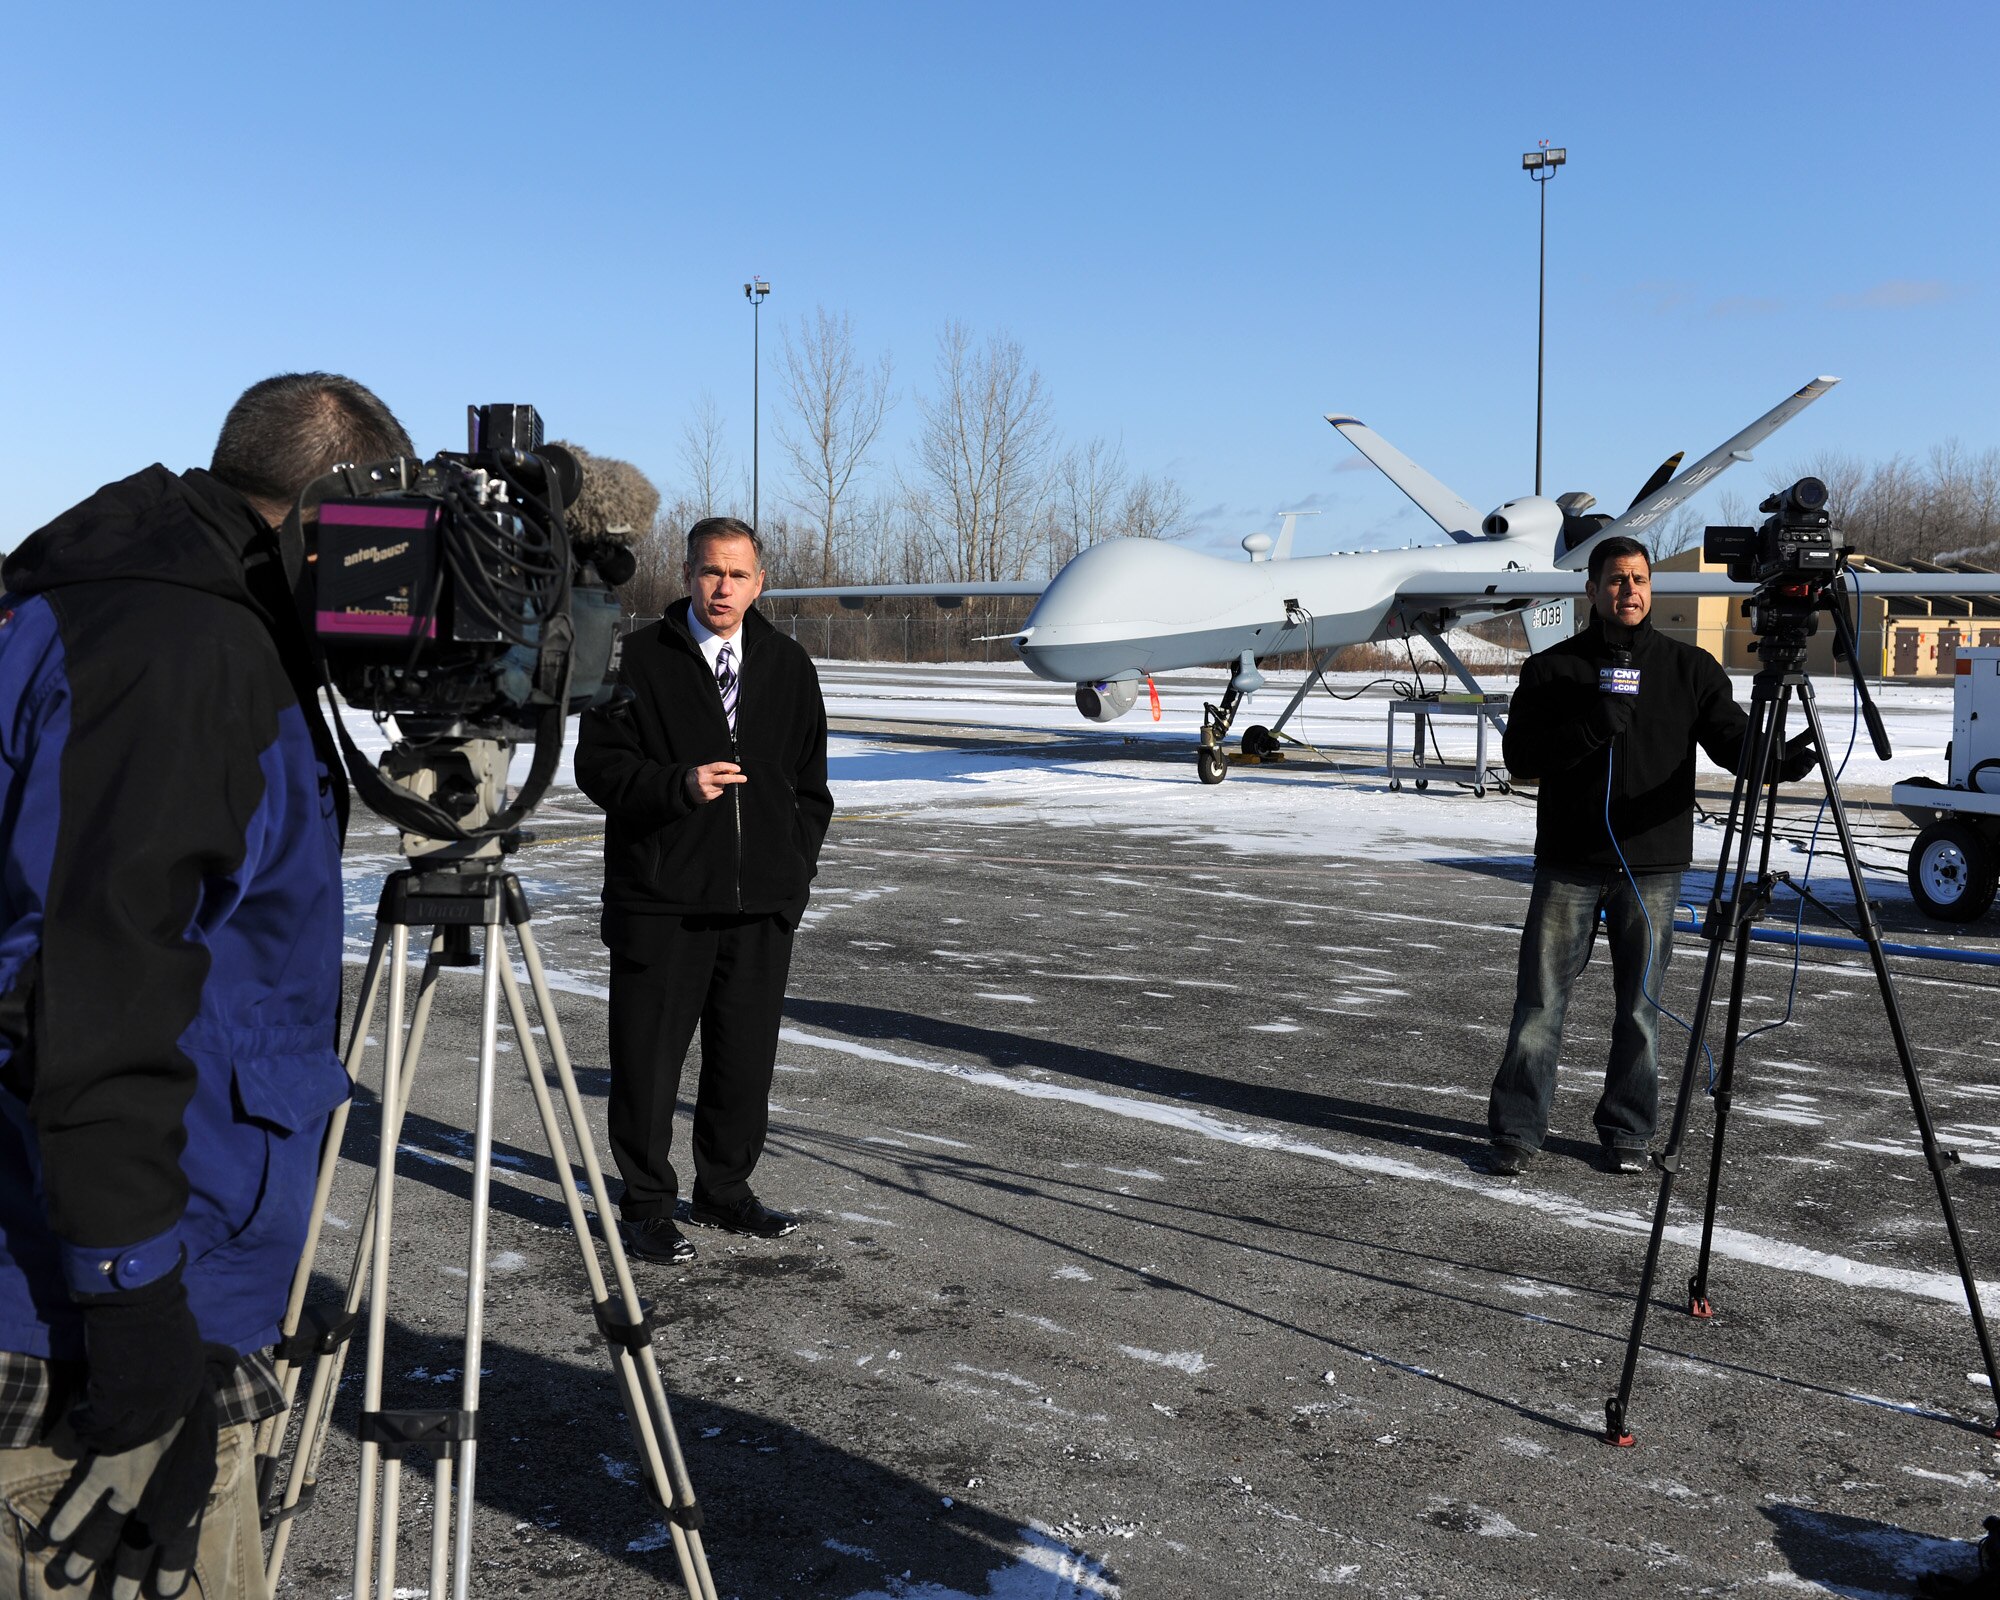 Members of the local media record stand-ups in front of an MQ-9 Reaper Remotely Piloted Aircraft at Hancock Field in Syracuse, NY on 17 Dec. 2009. The media were invited to observe MQ-9 operations at the 174th Fighter Wing. (US Air Force photo by Tech. Sgt. Jeremy M. Call/Released)